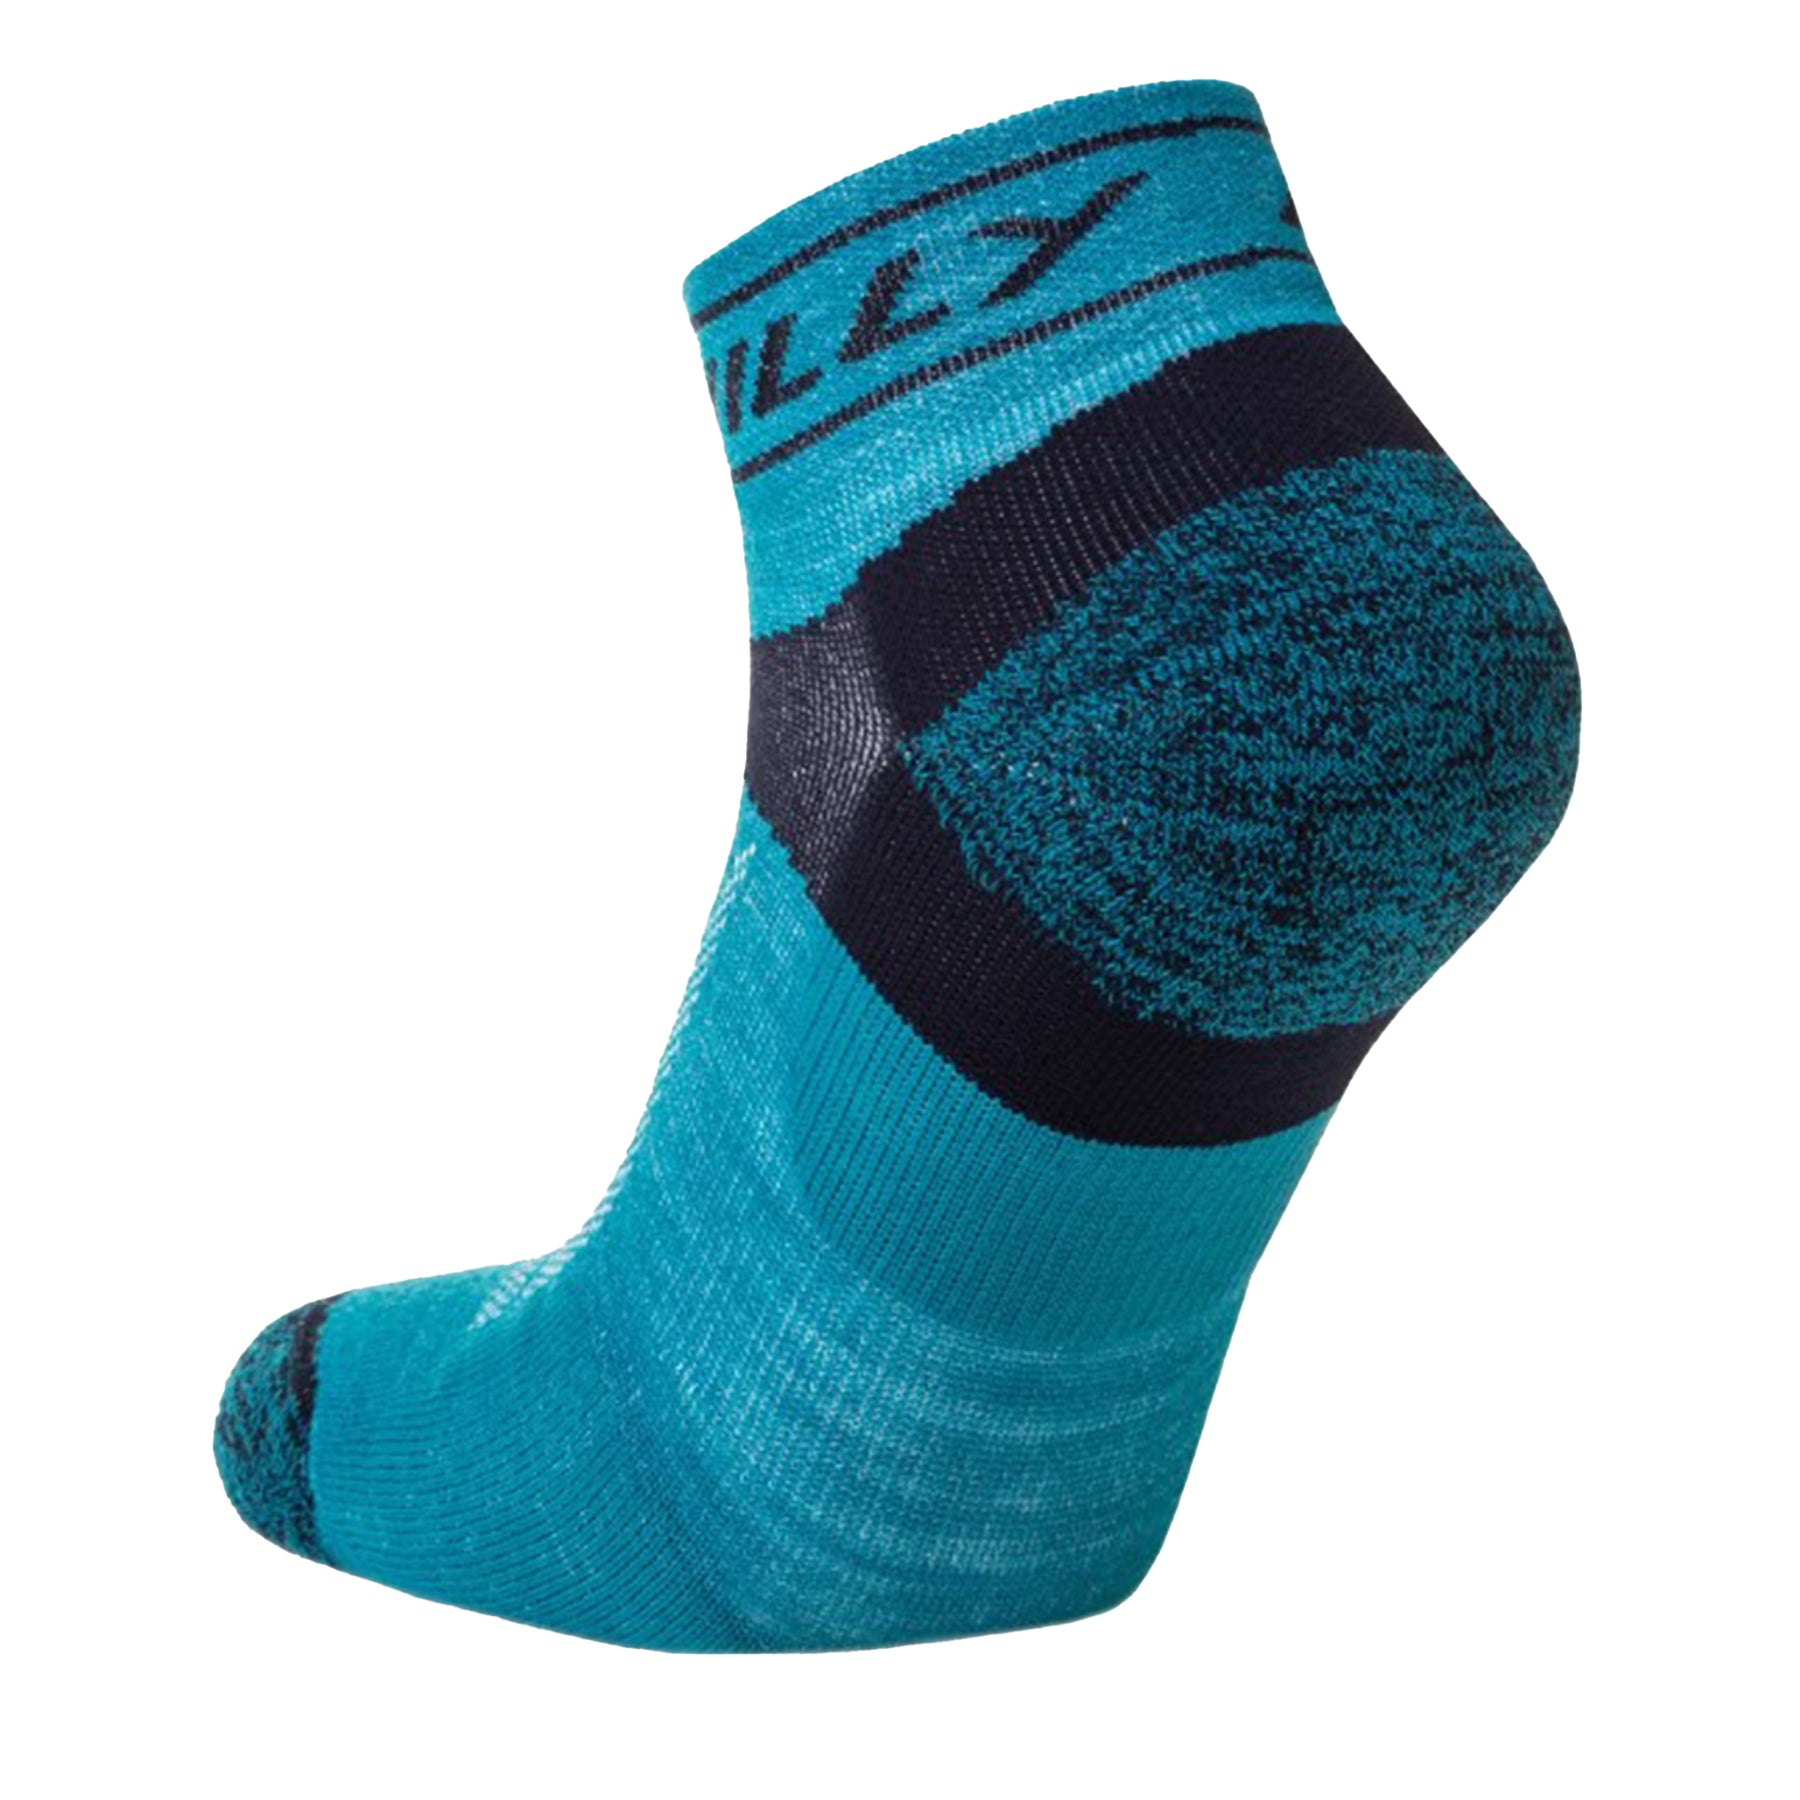 Hilly Trail QUnder Armourrter: Turquoise/Navy